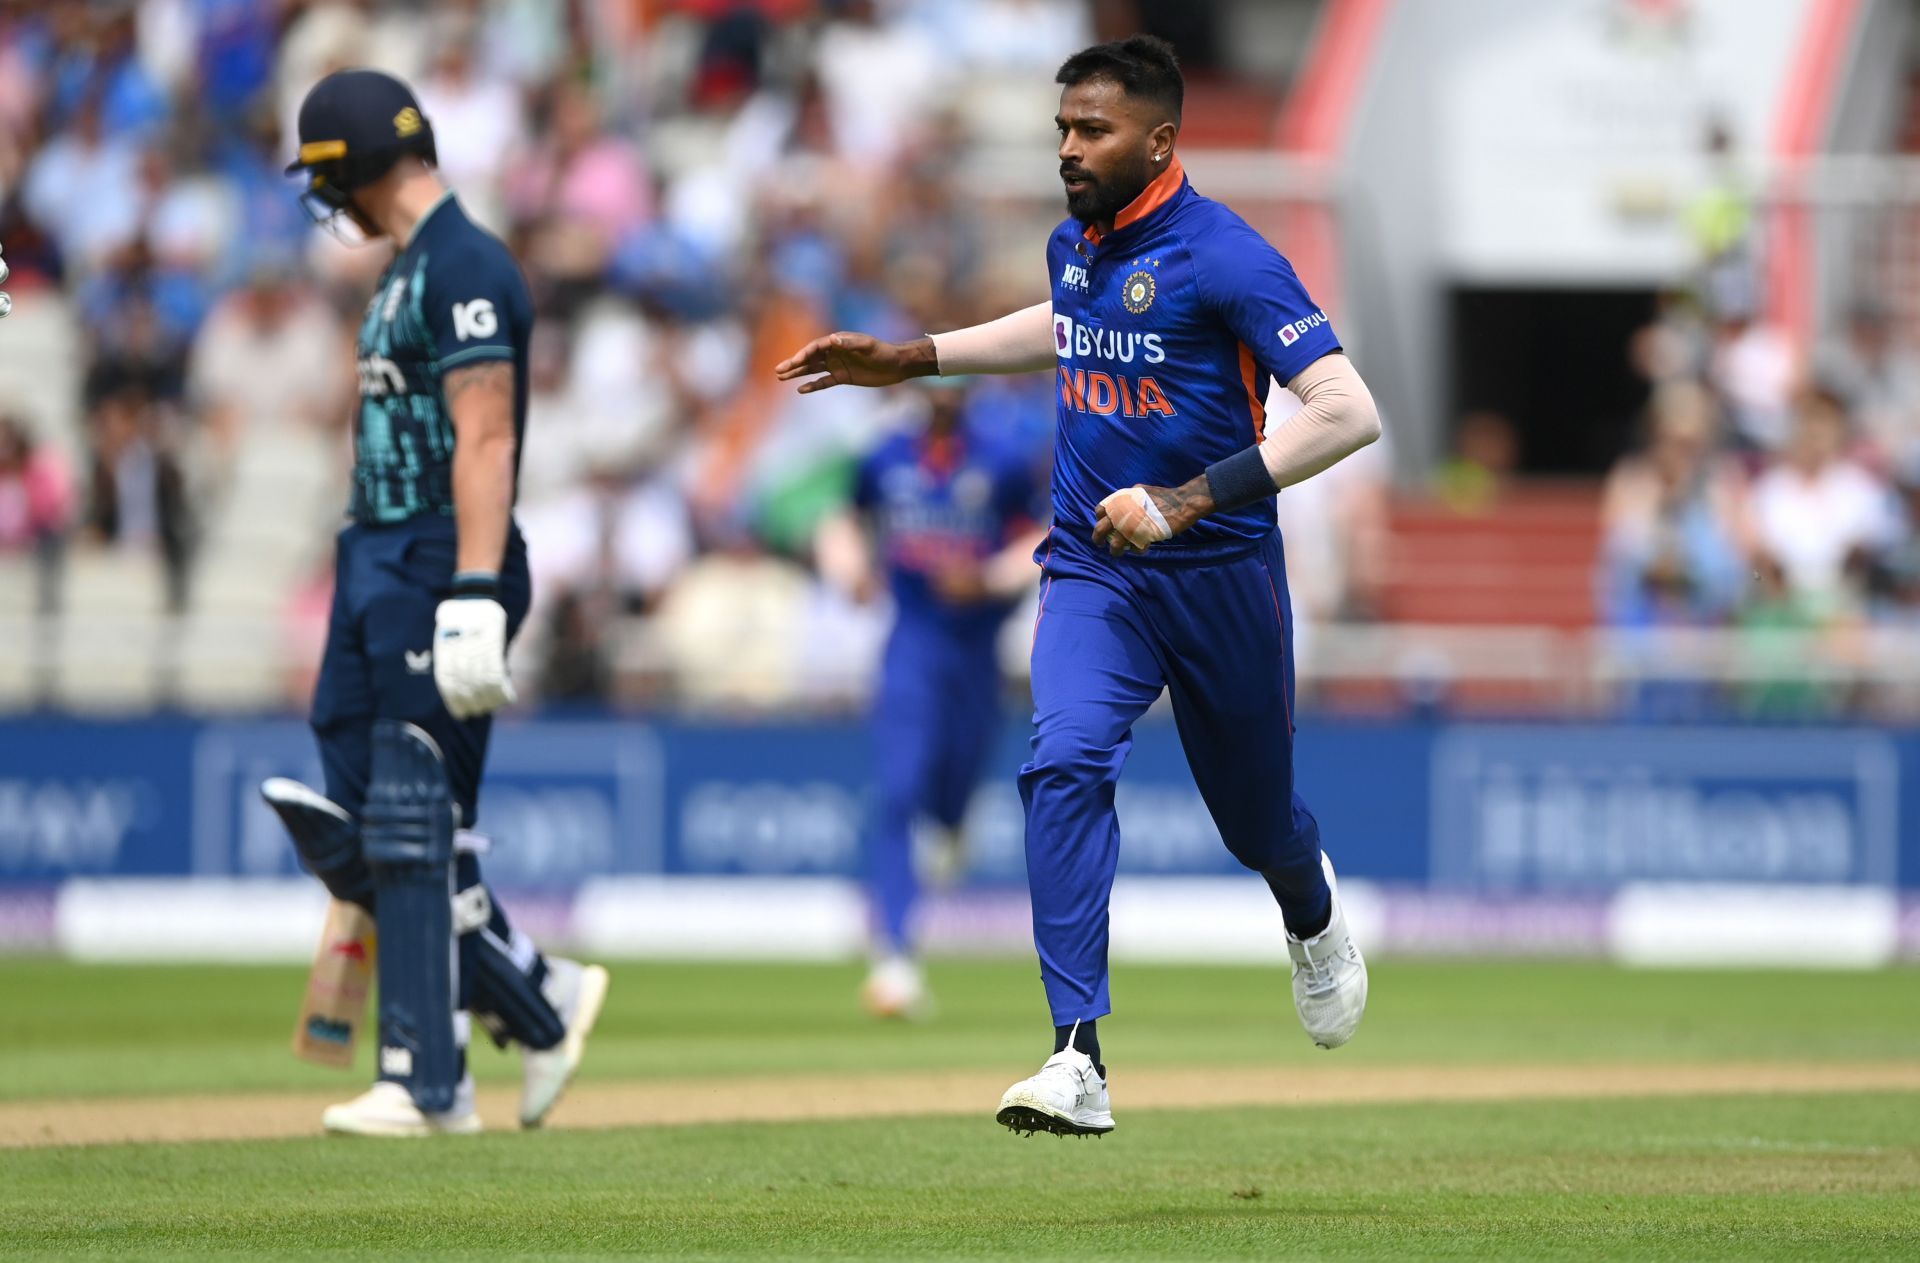 Hardik was superb with the ball in Manchester